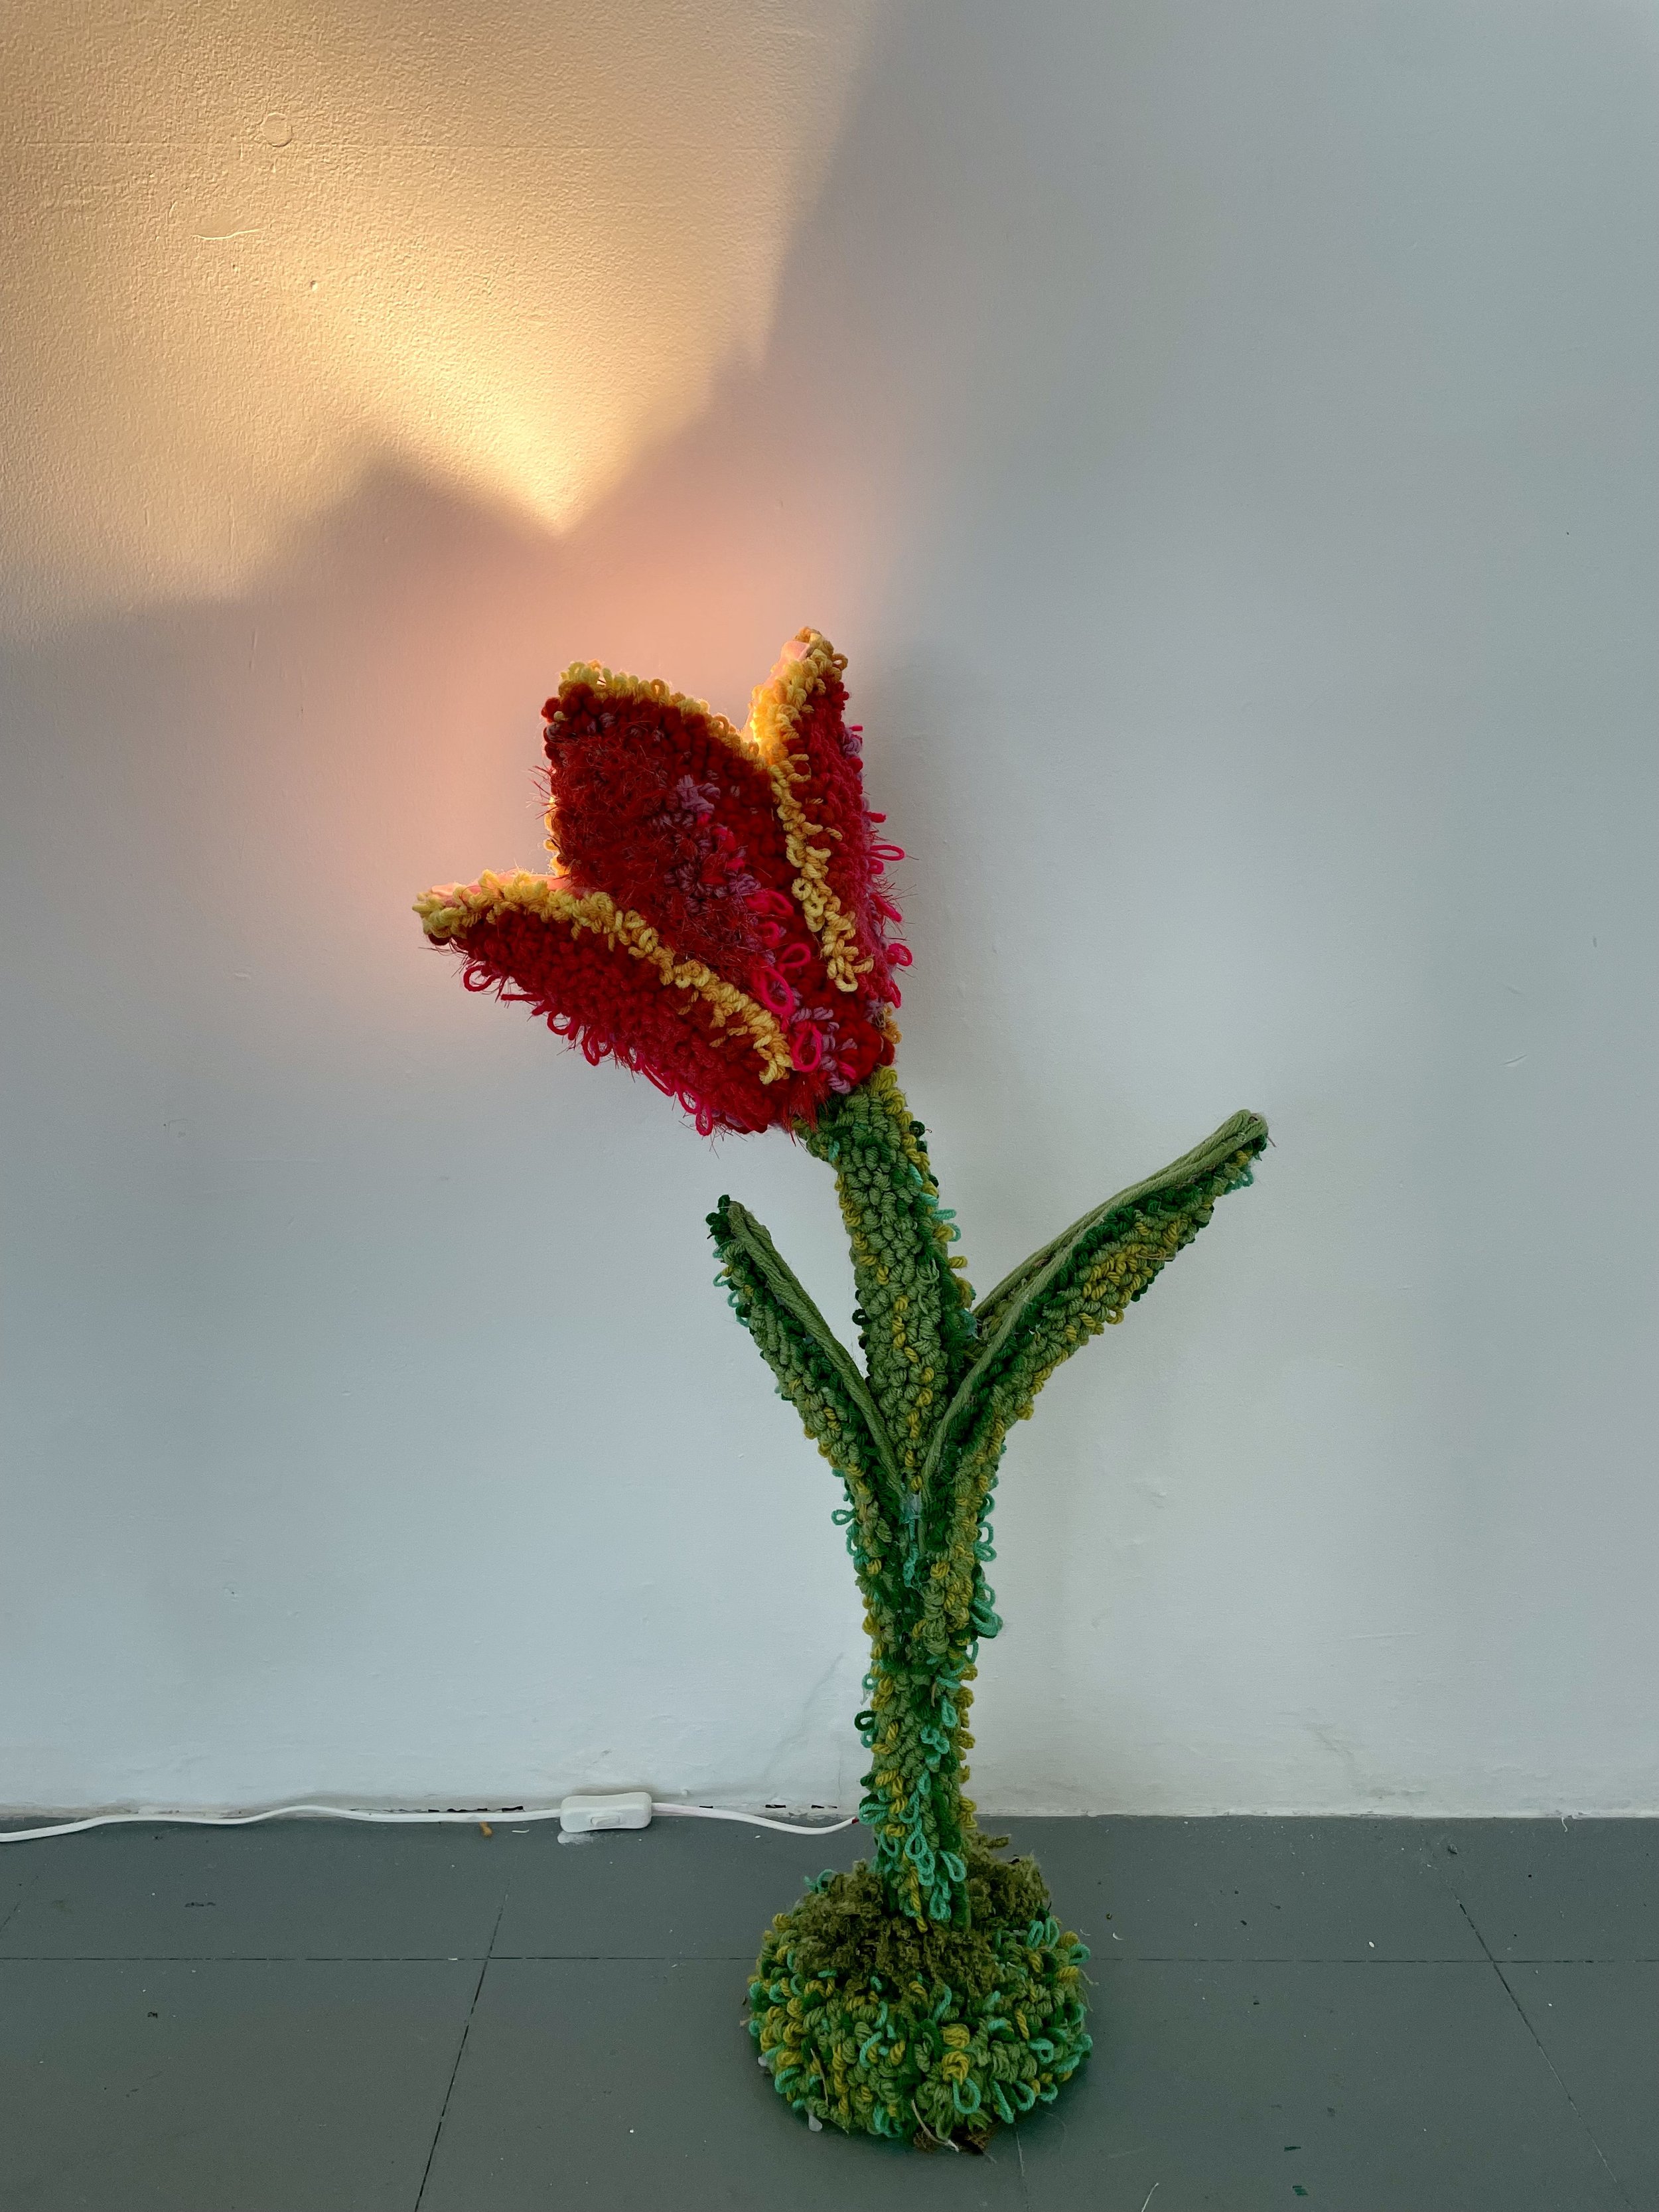 A glimpse of a orange glow in the blue dawn light, 2022, 75x30cm, wool, tinsel, wire, hessian and metal lamp 